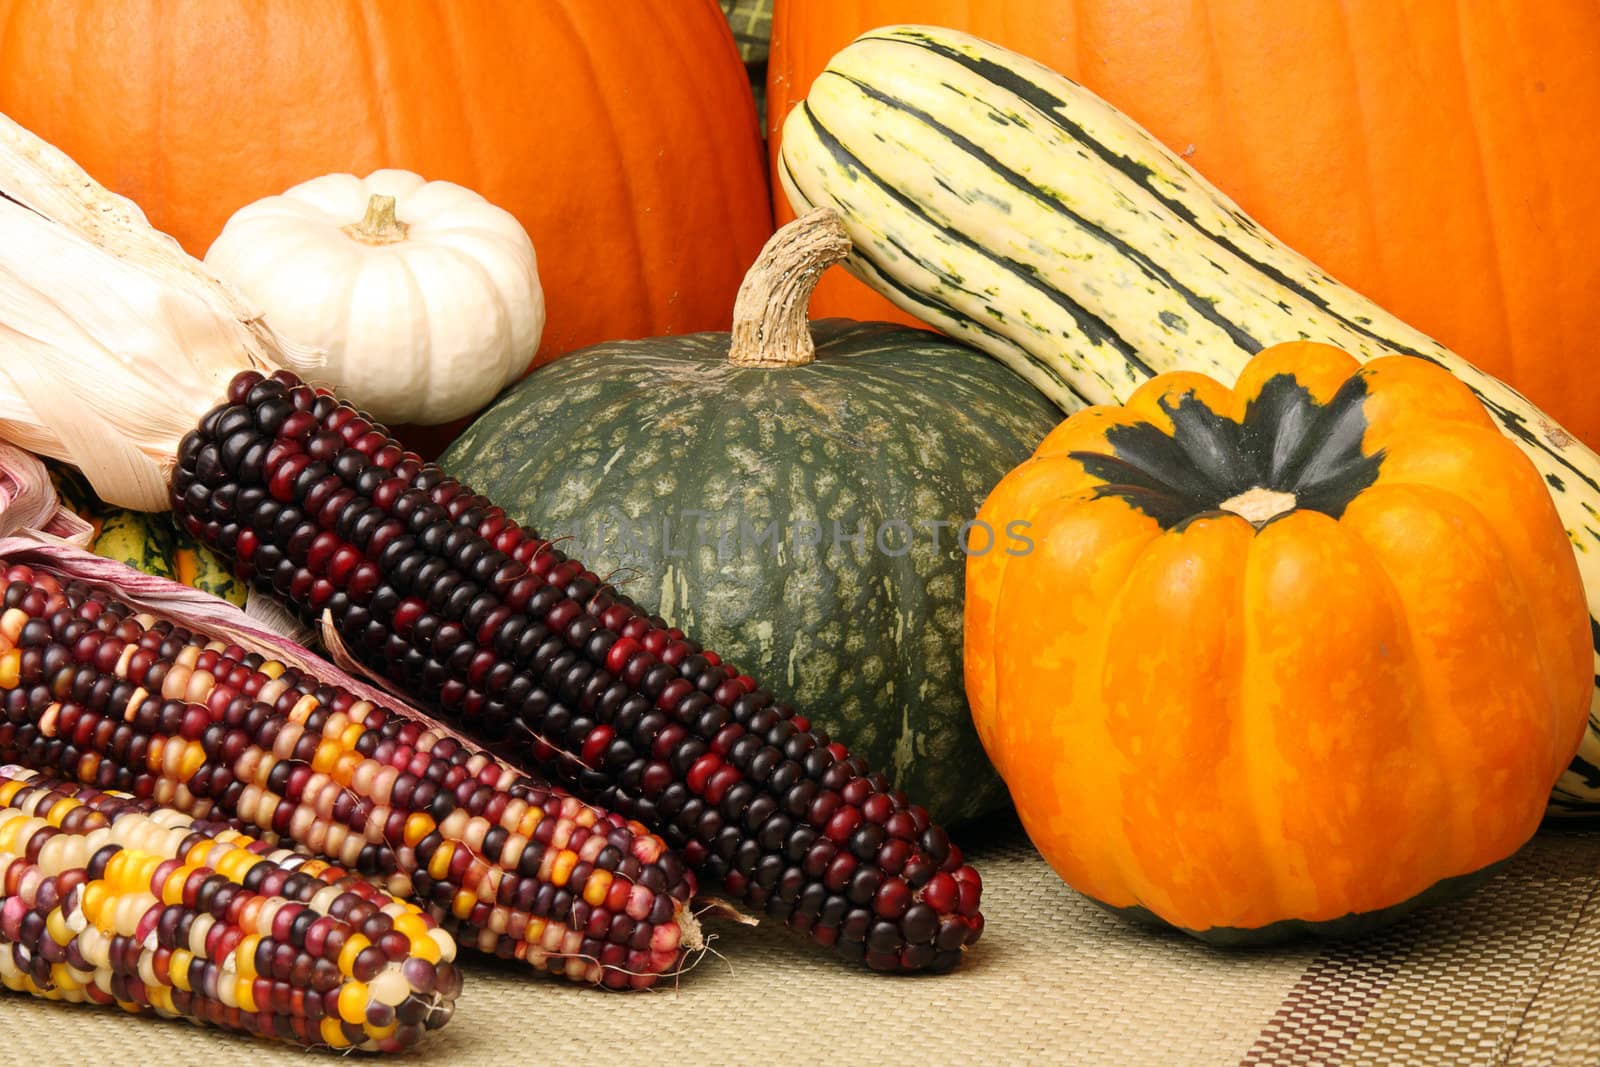 Autumn scene with pumpkins, corn, and colorful orange and green squash